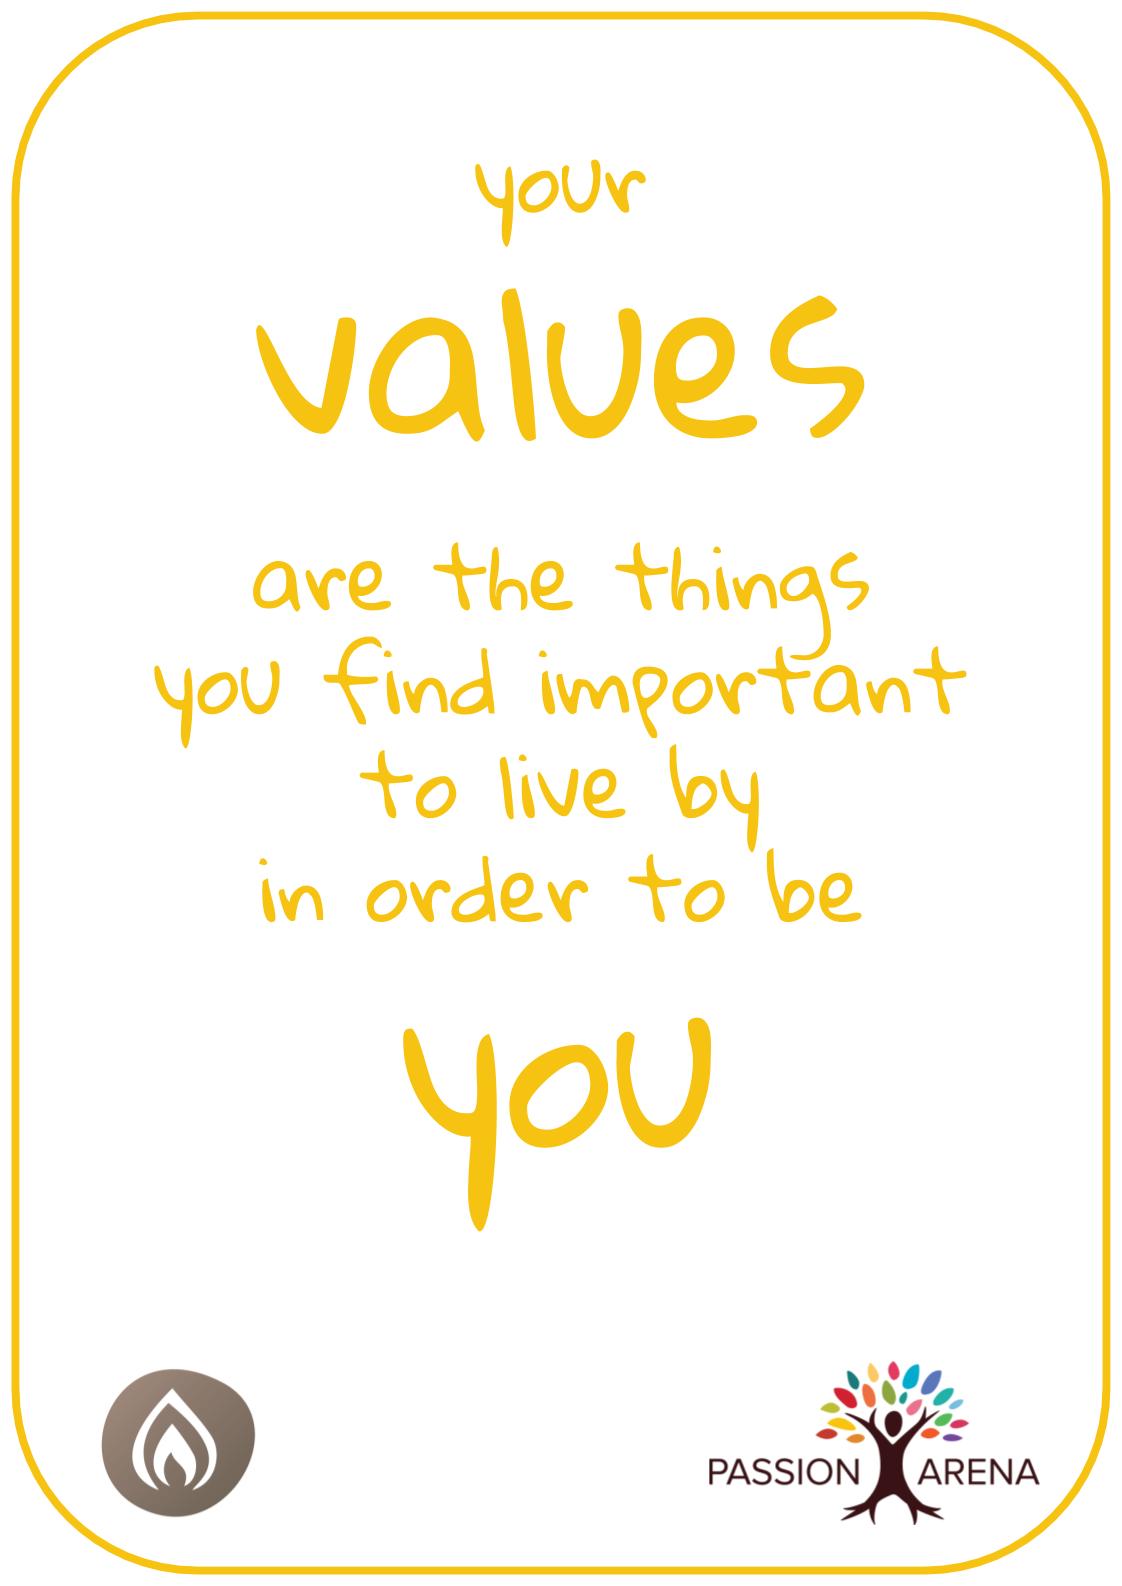 Intro-2-29. What are your values and beliefs?